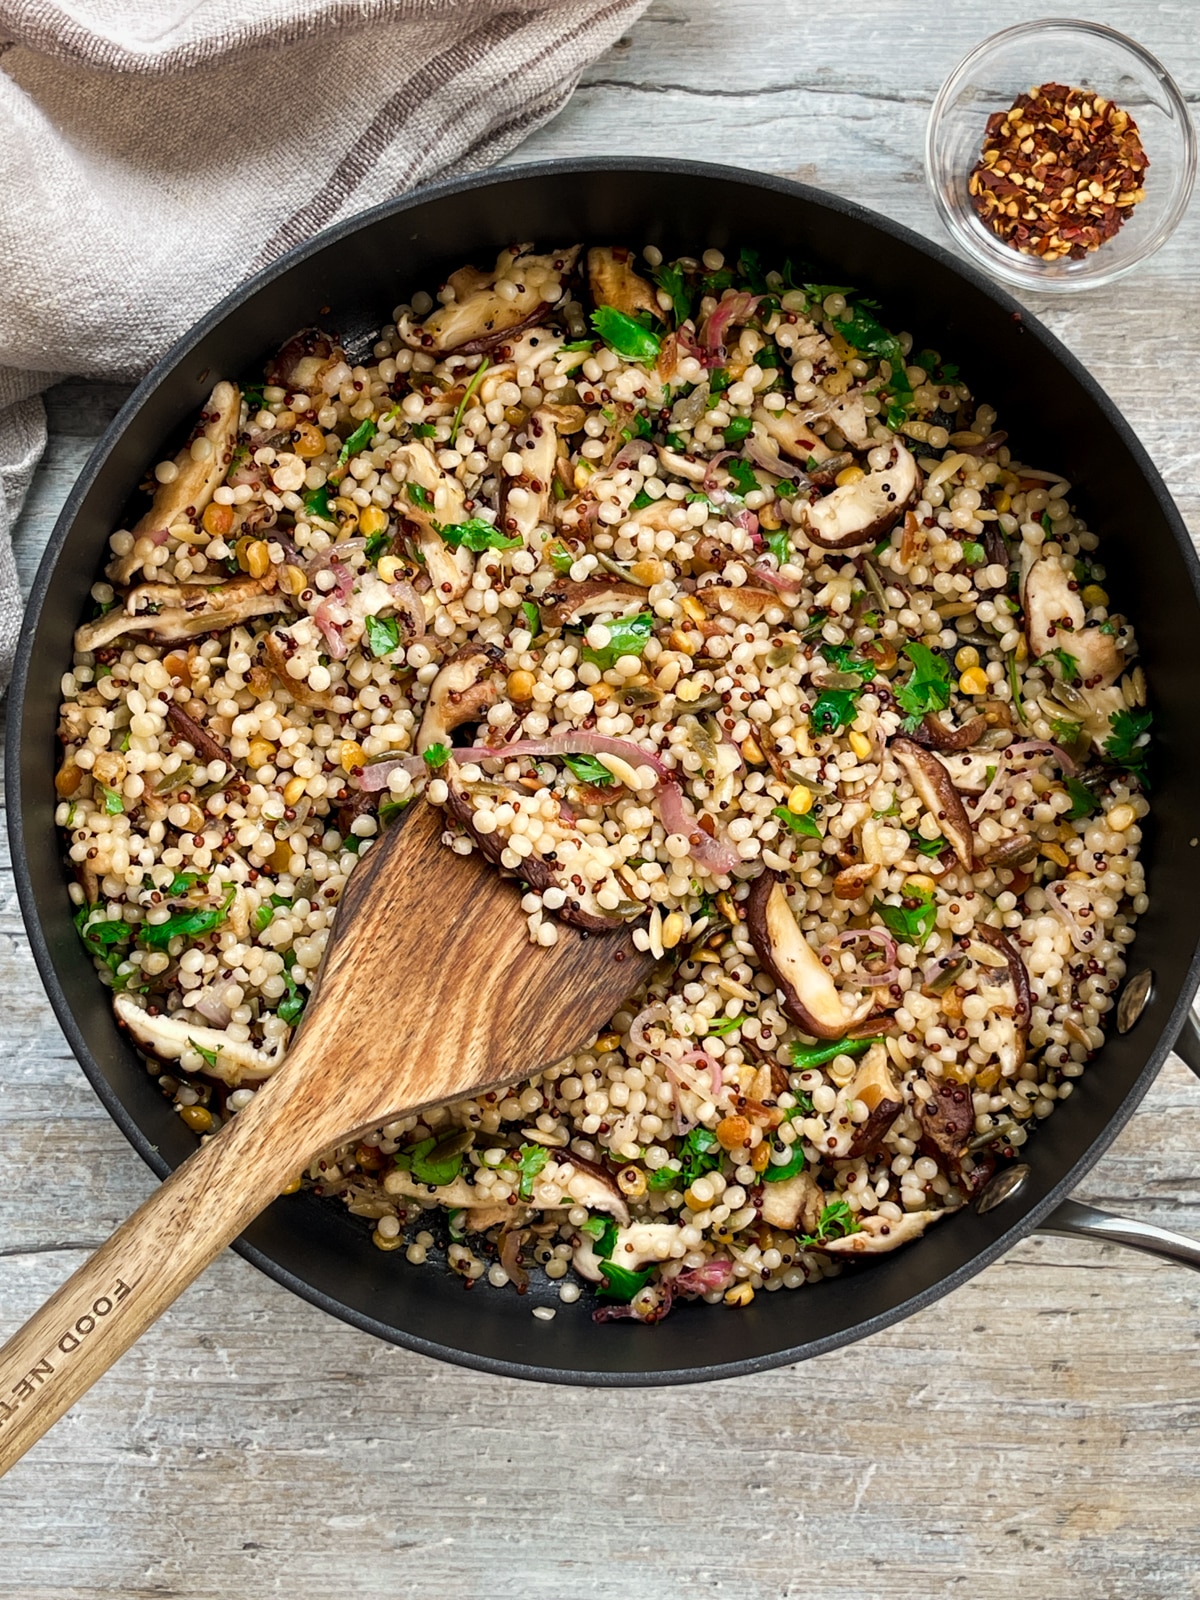 A wooden spatula inserted into a frying pan filled couscous and quinoa with shiitake mushrooms on top of a wooden board with a linen napkin and red pepper flakes on the side.